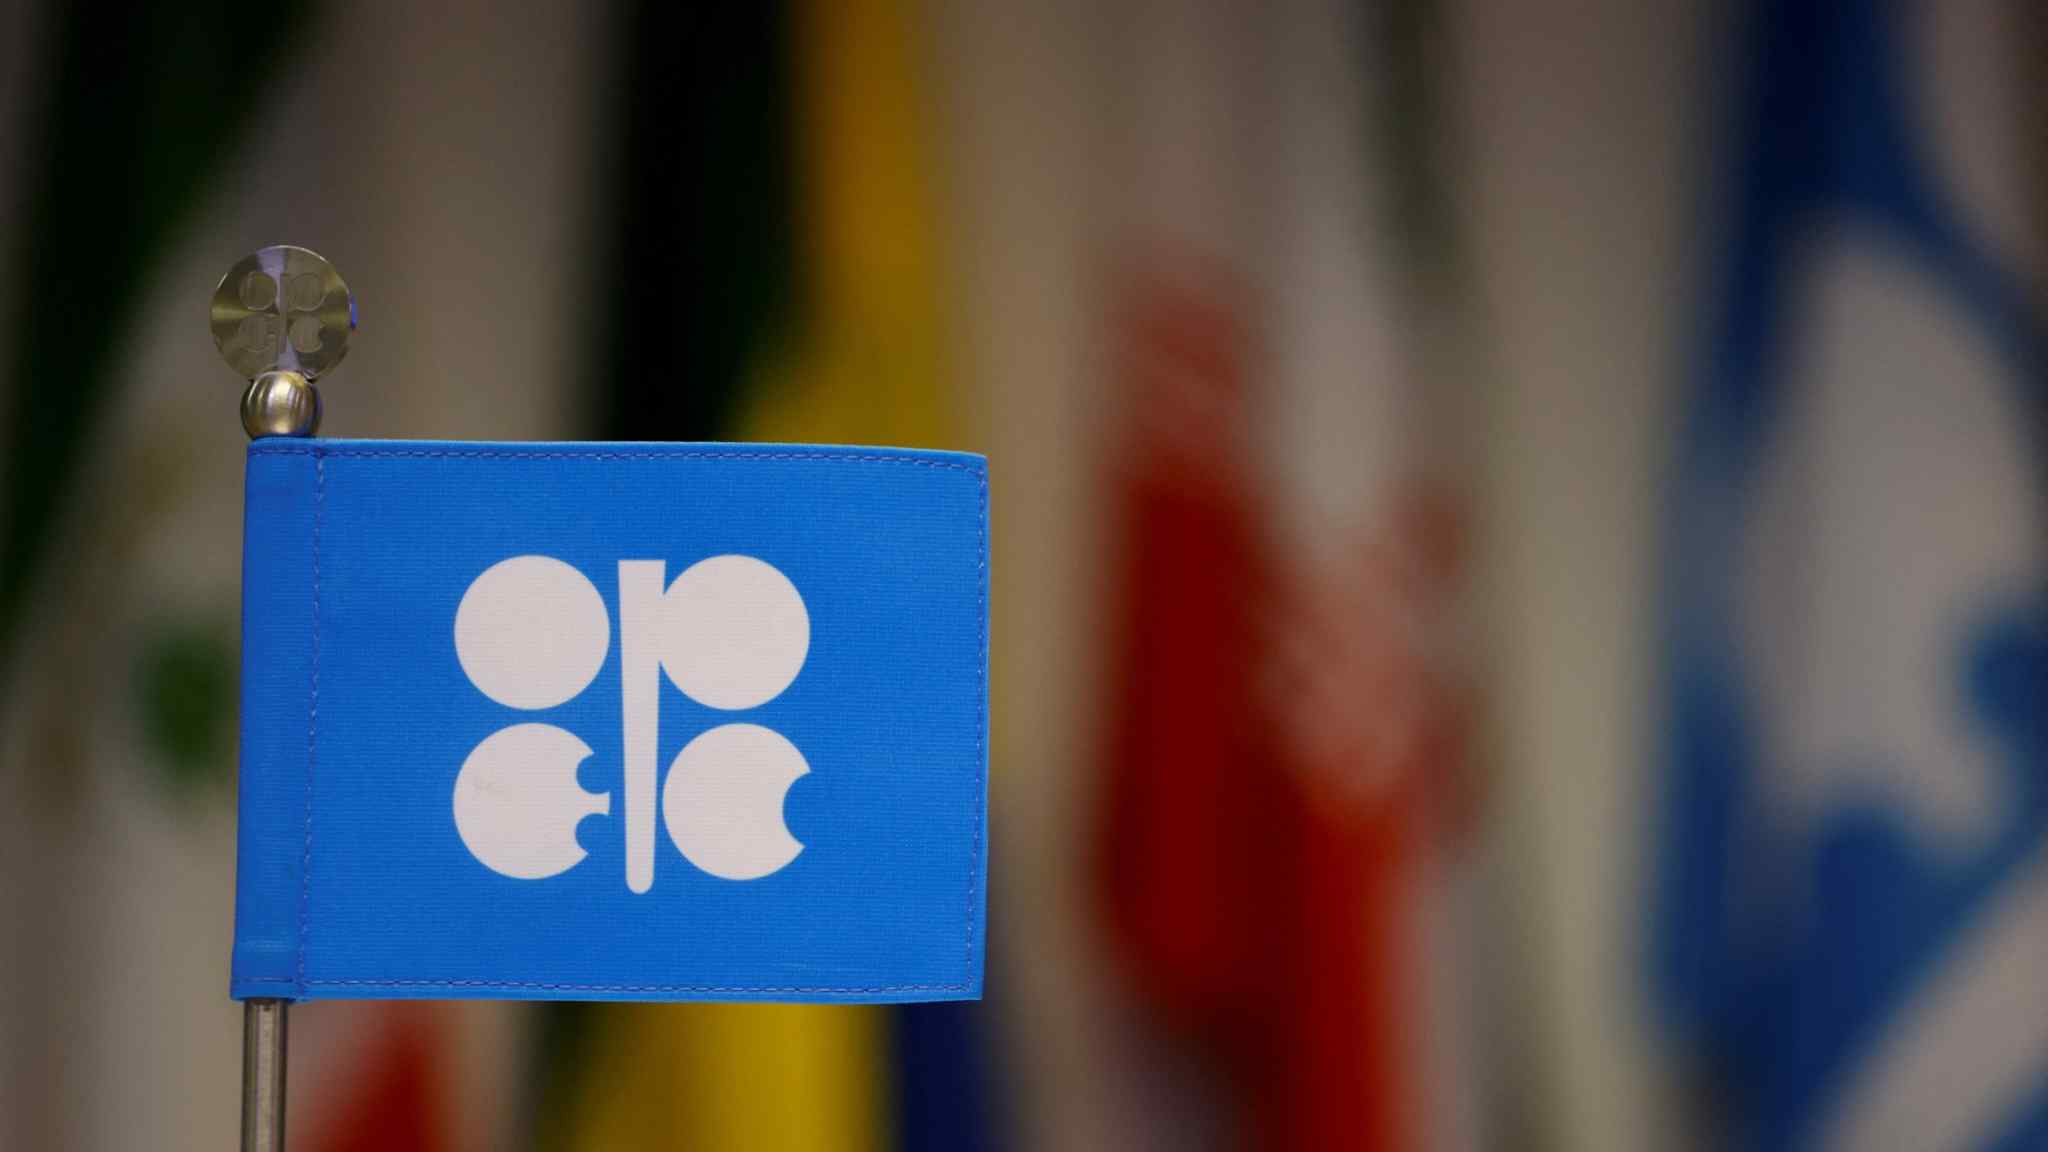 Opec+ holds oil output steady as new sanctions on Russia loom